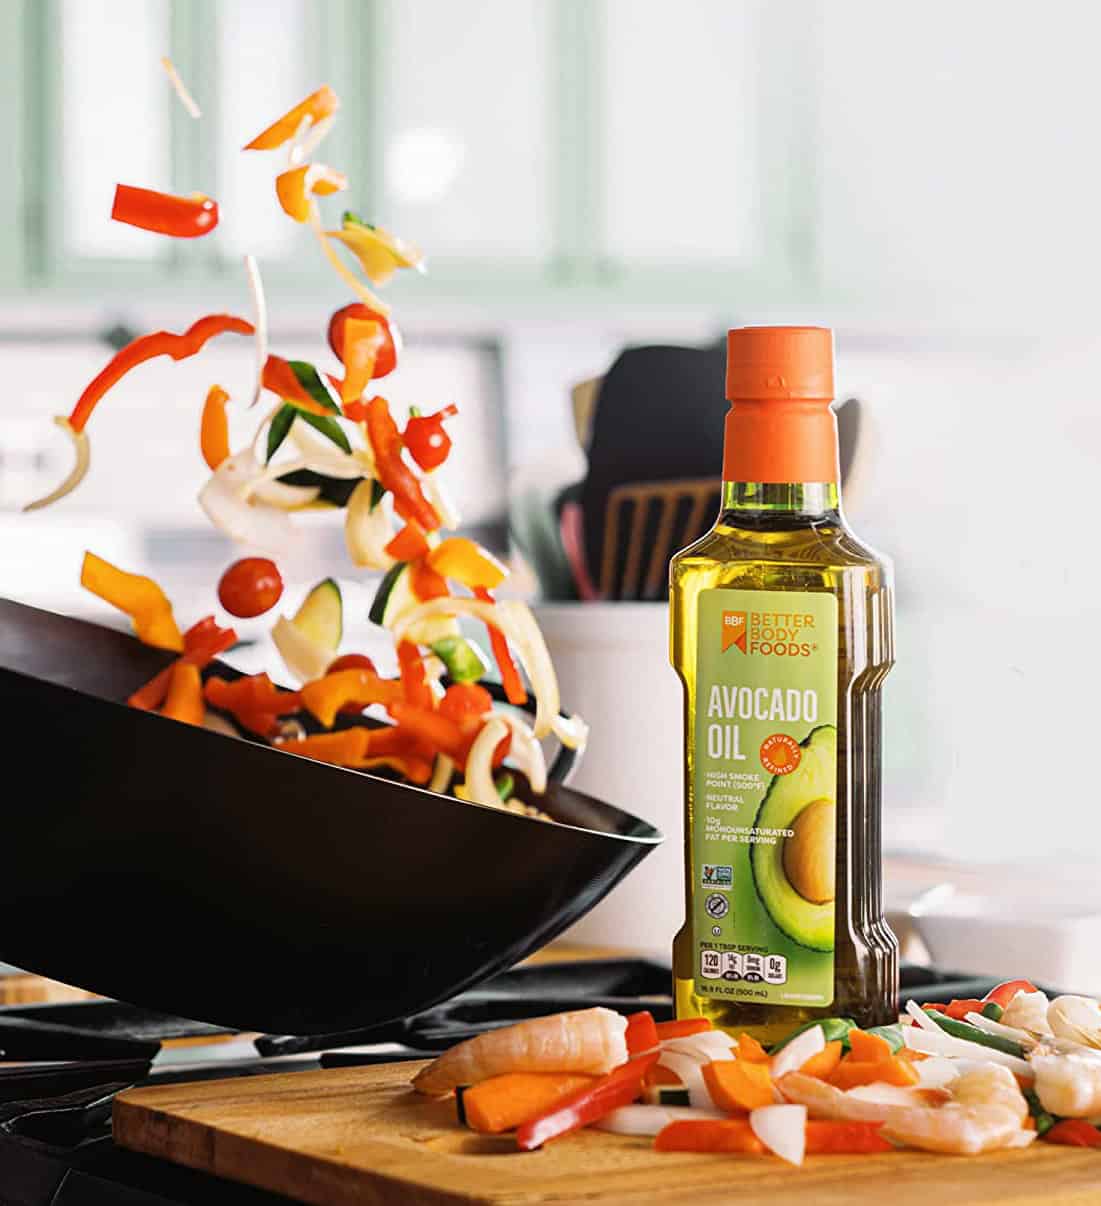 Use BetterBody Foods Avocado Oil as a substitute for sesame oil